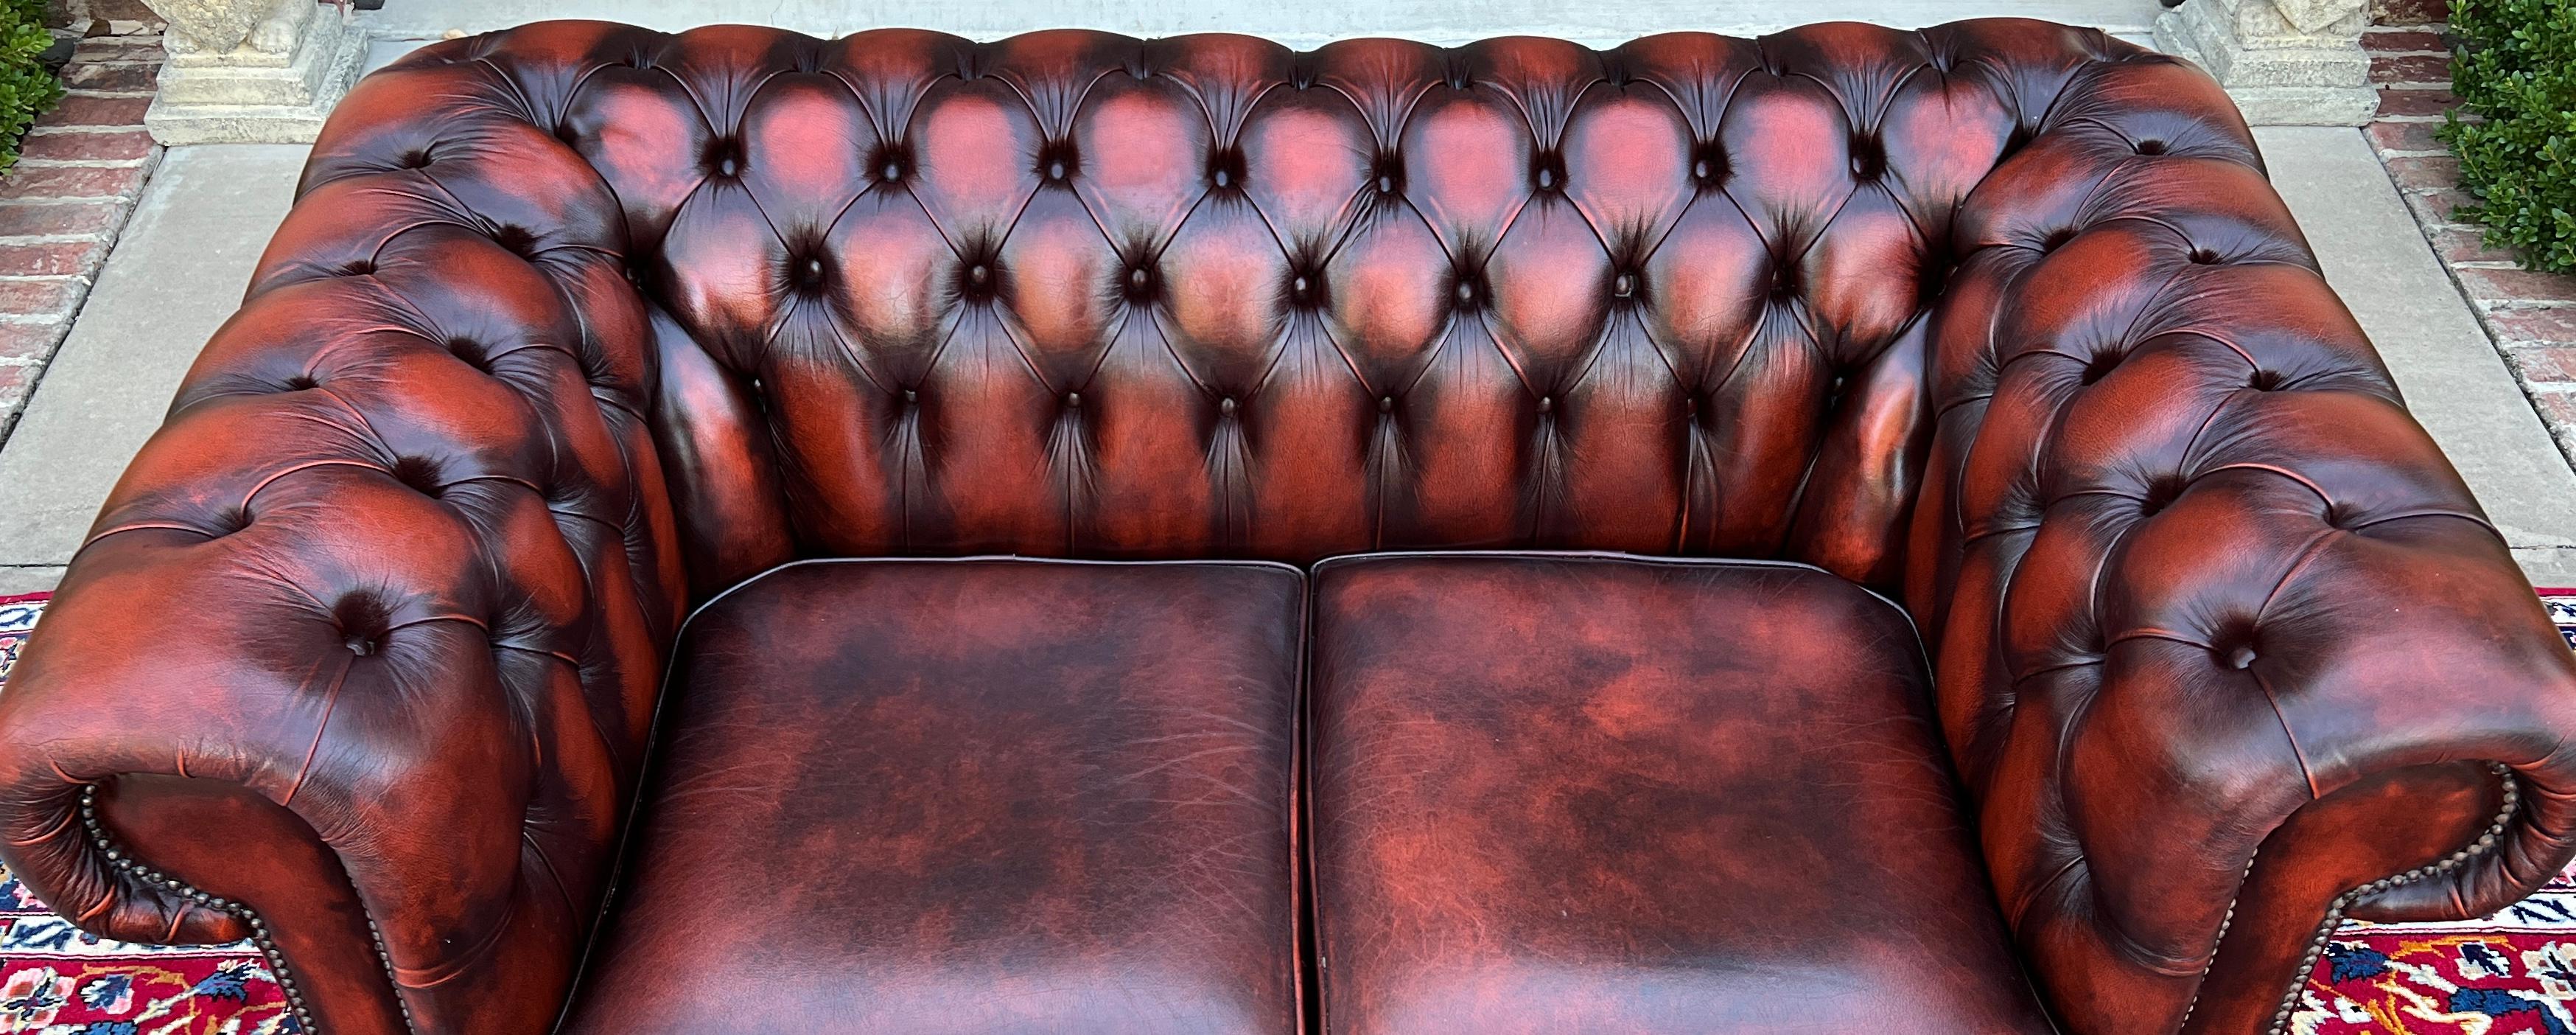 Vintage English Chesterfield Leather Tufted Love Seat Sofa Oxblood Red #1 For Sale 2